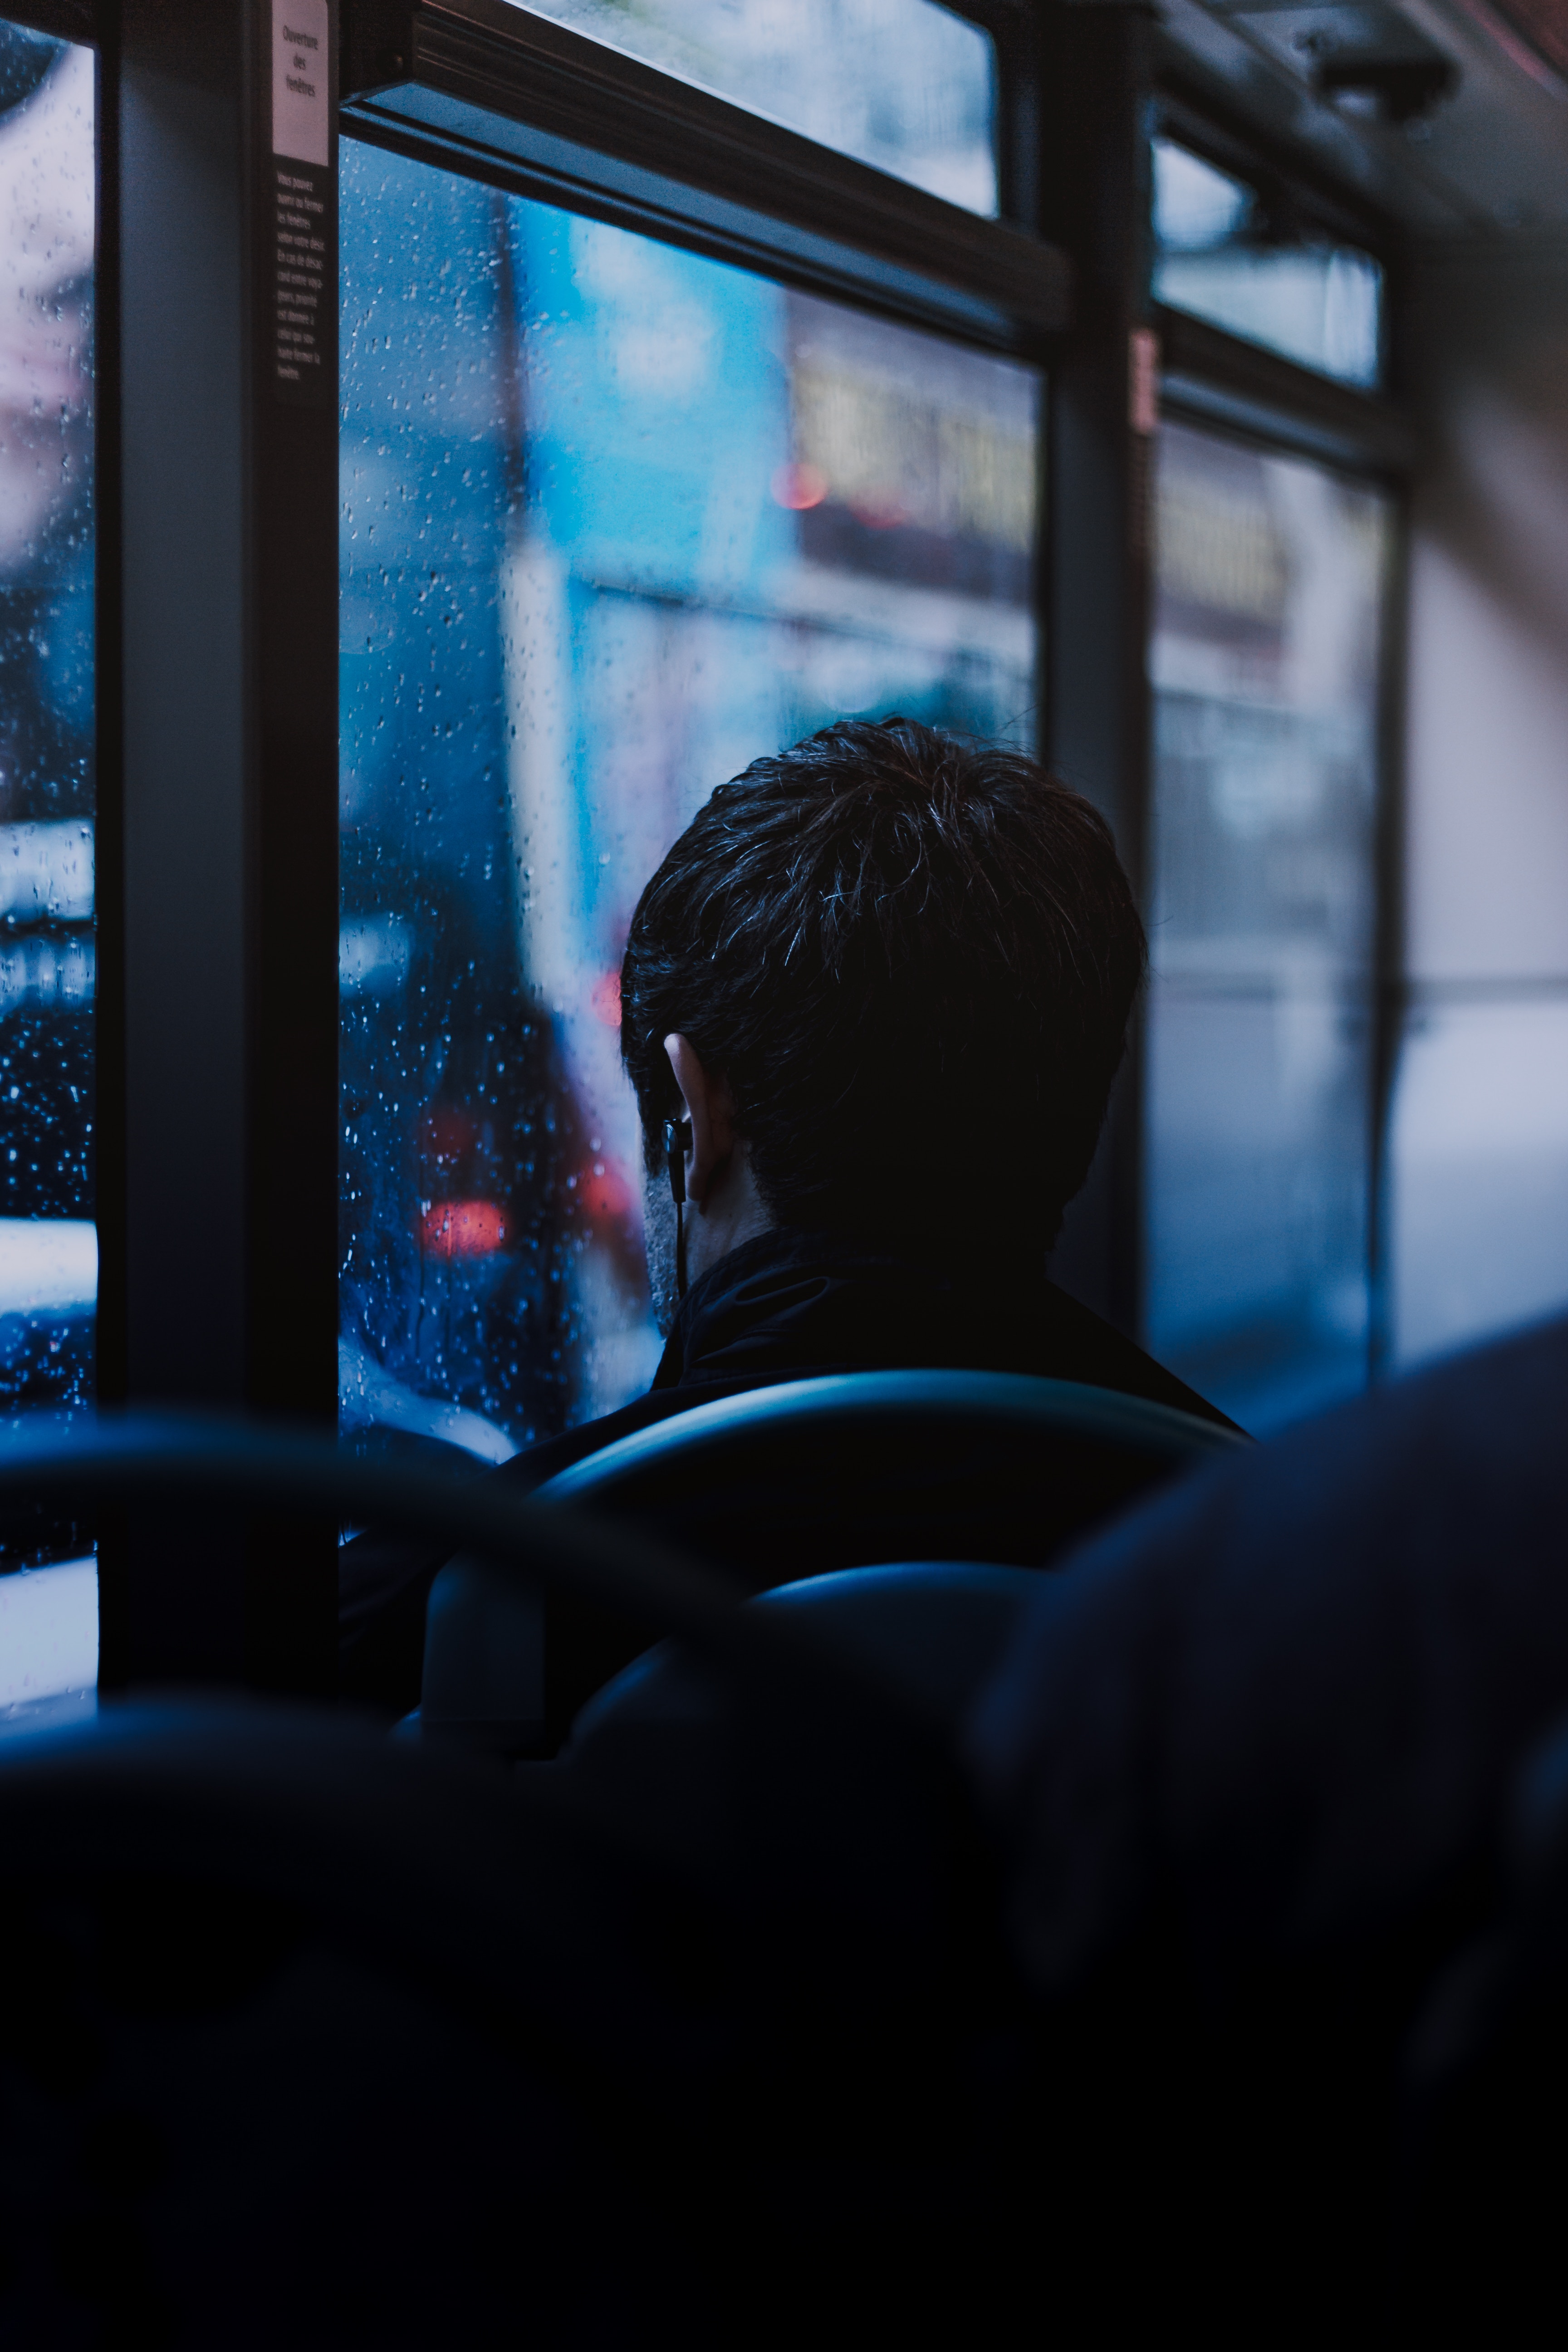 61982 download wallpaper headphones, rain, miscellanea, miscellaneous, window, human, person, trip, melancholy screensavers and pictures for free